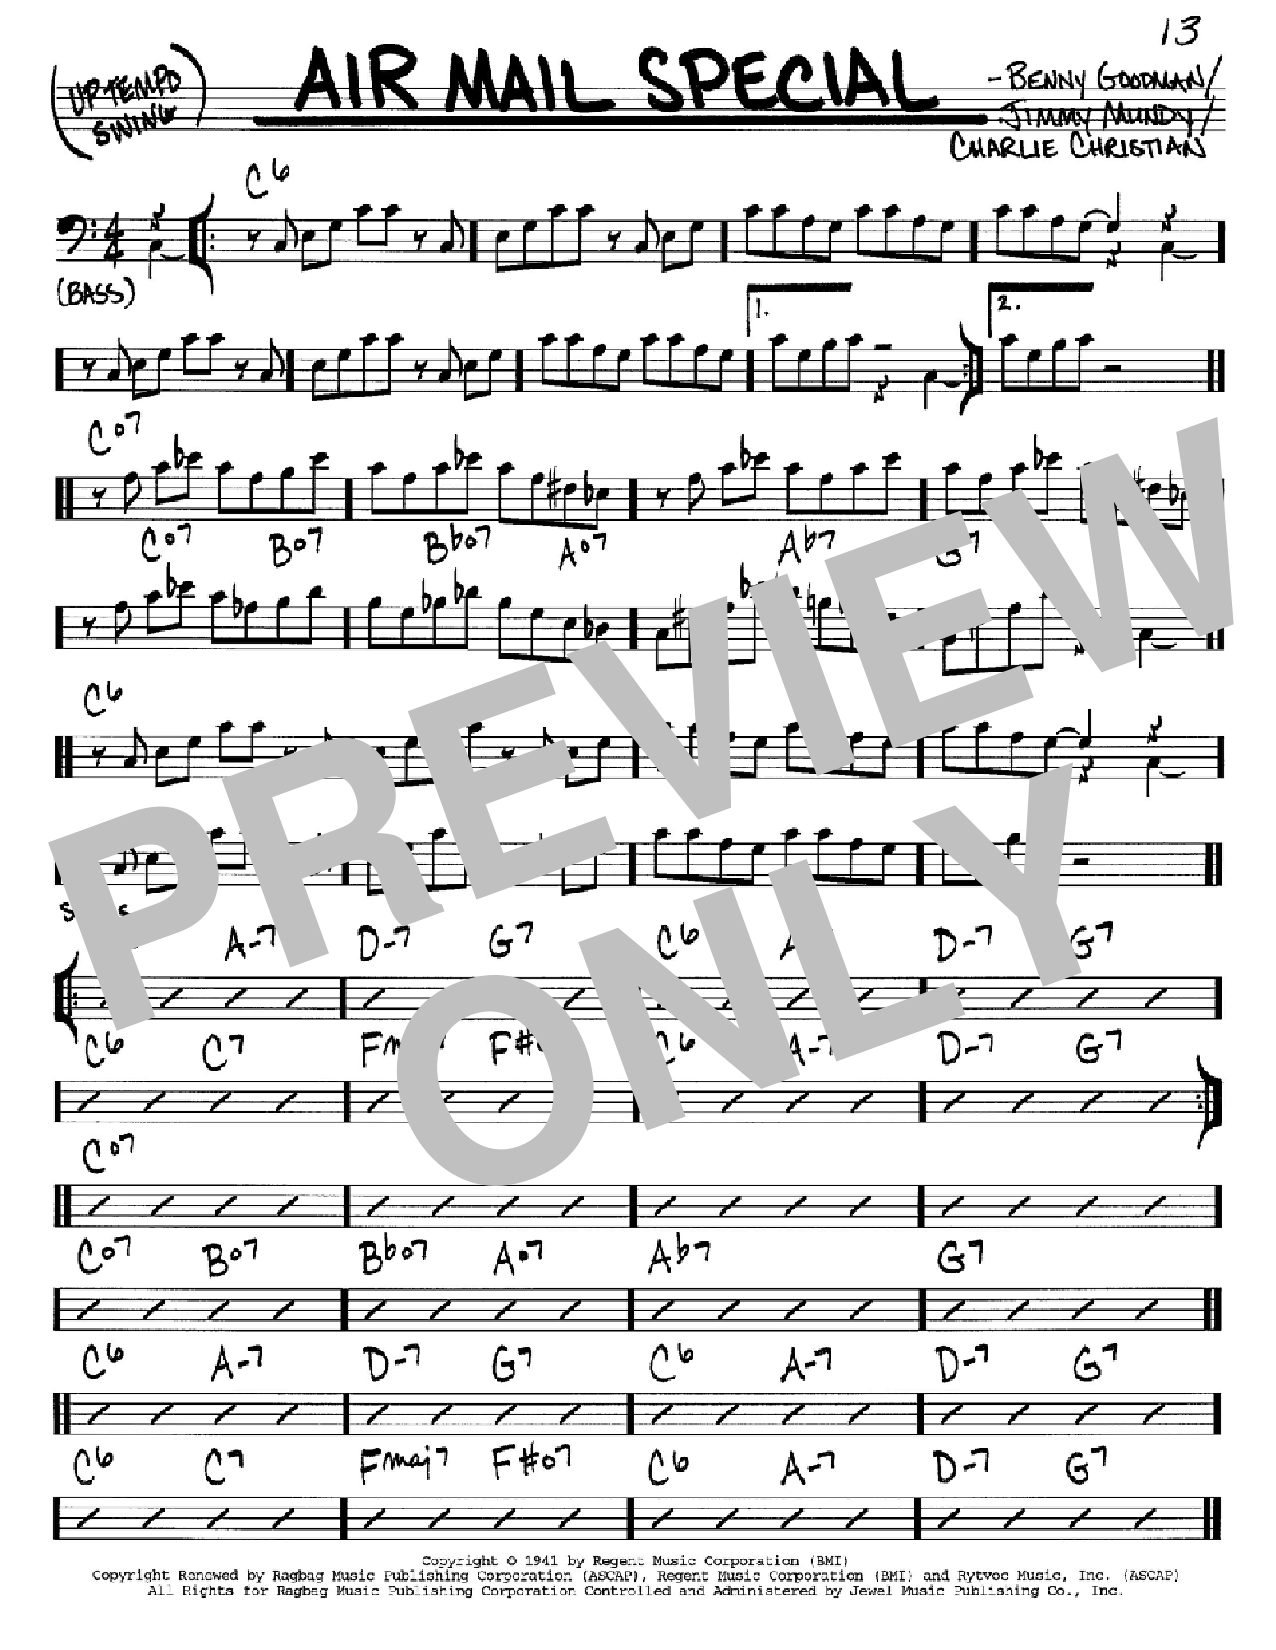 Download Benny Goodman Air Mail Special Sheet Music